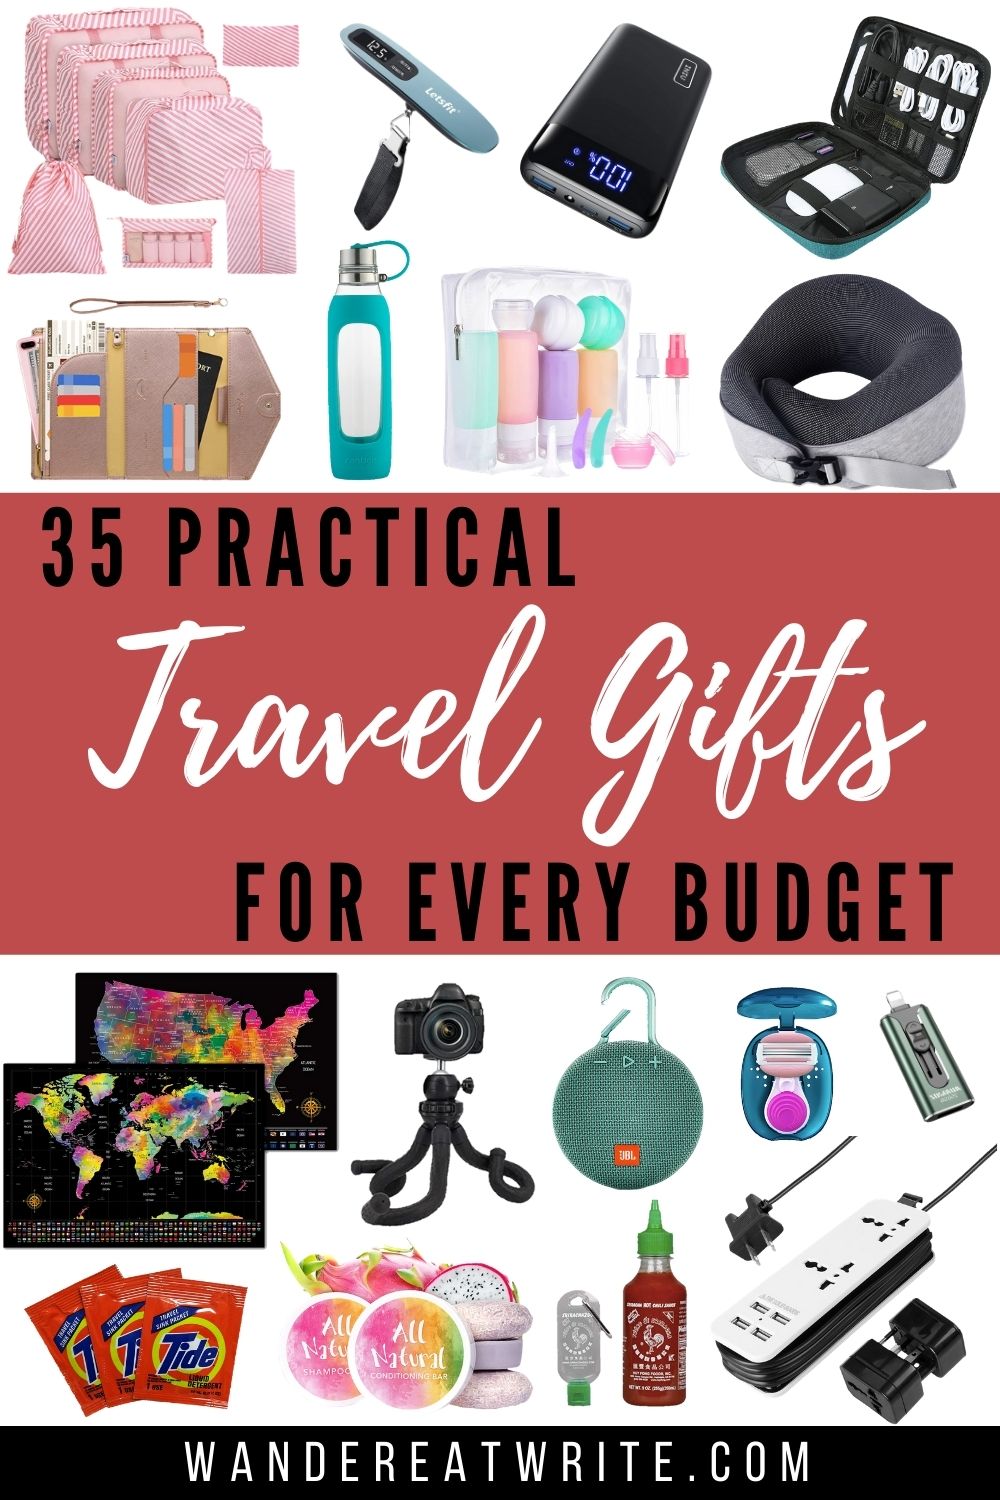 Gift ideas for Travelers and Commuters